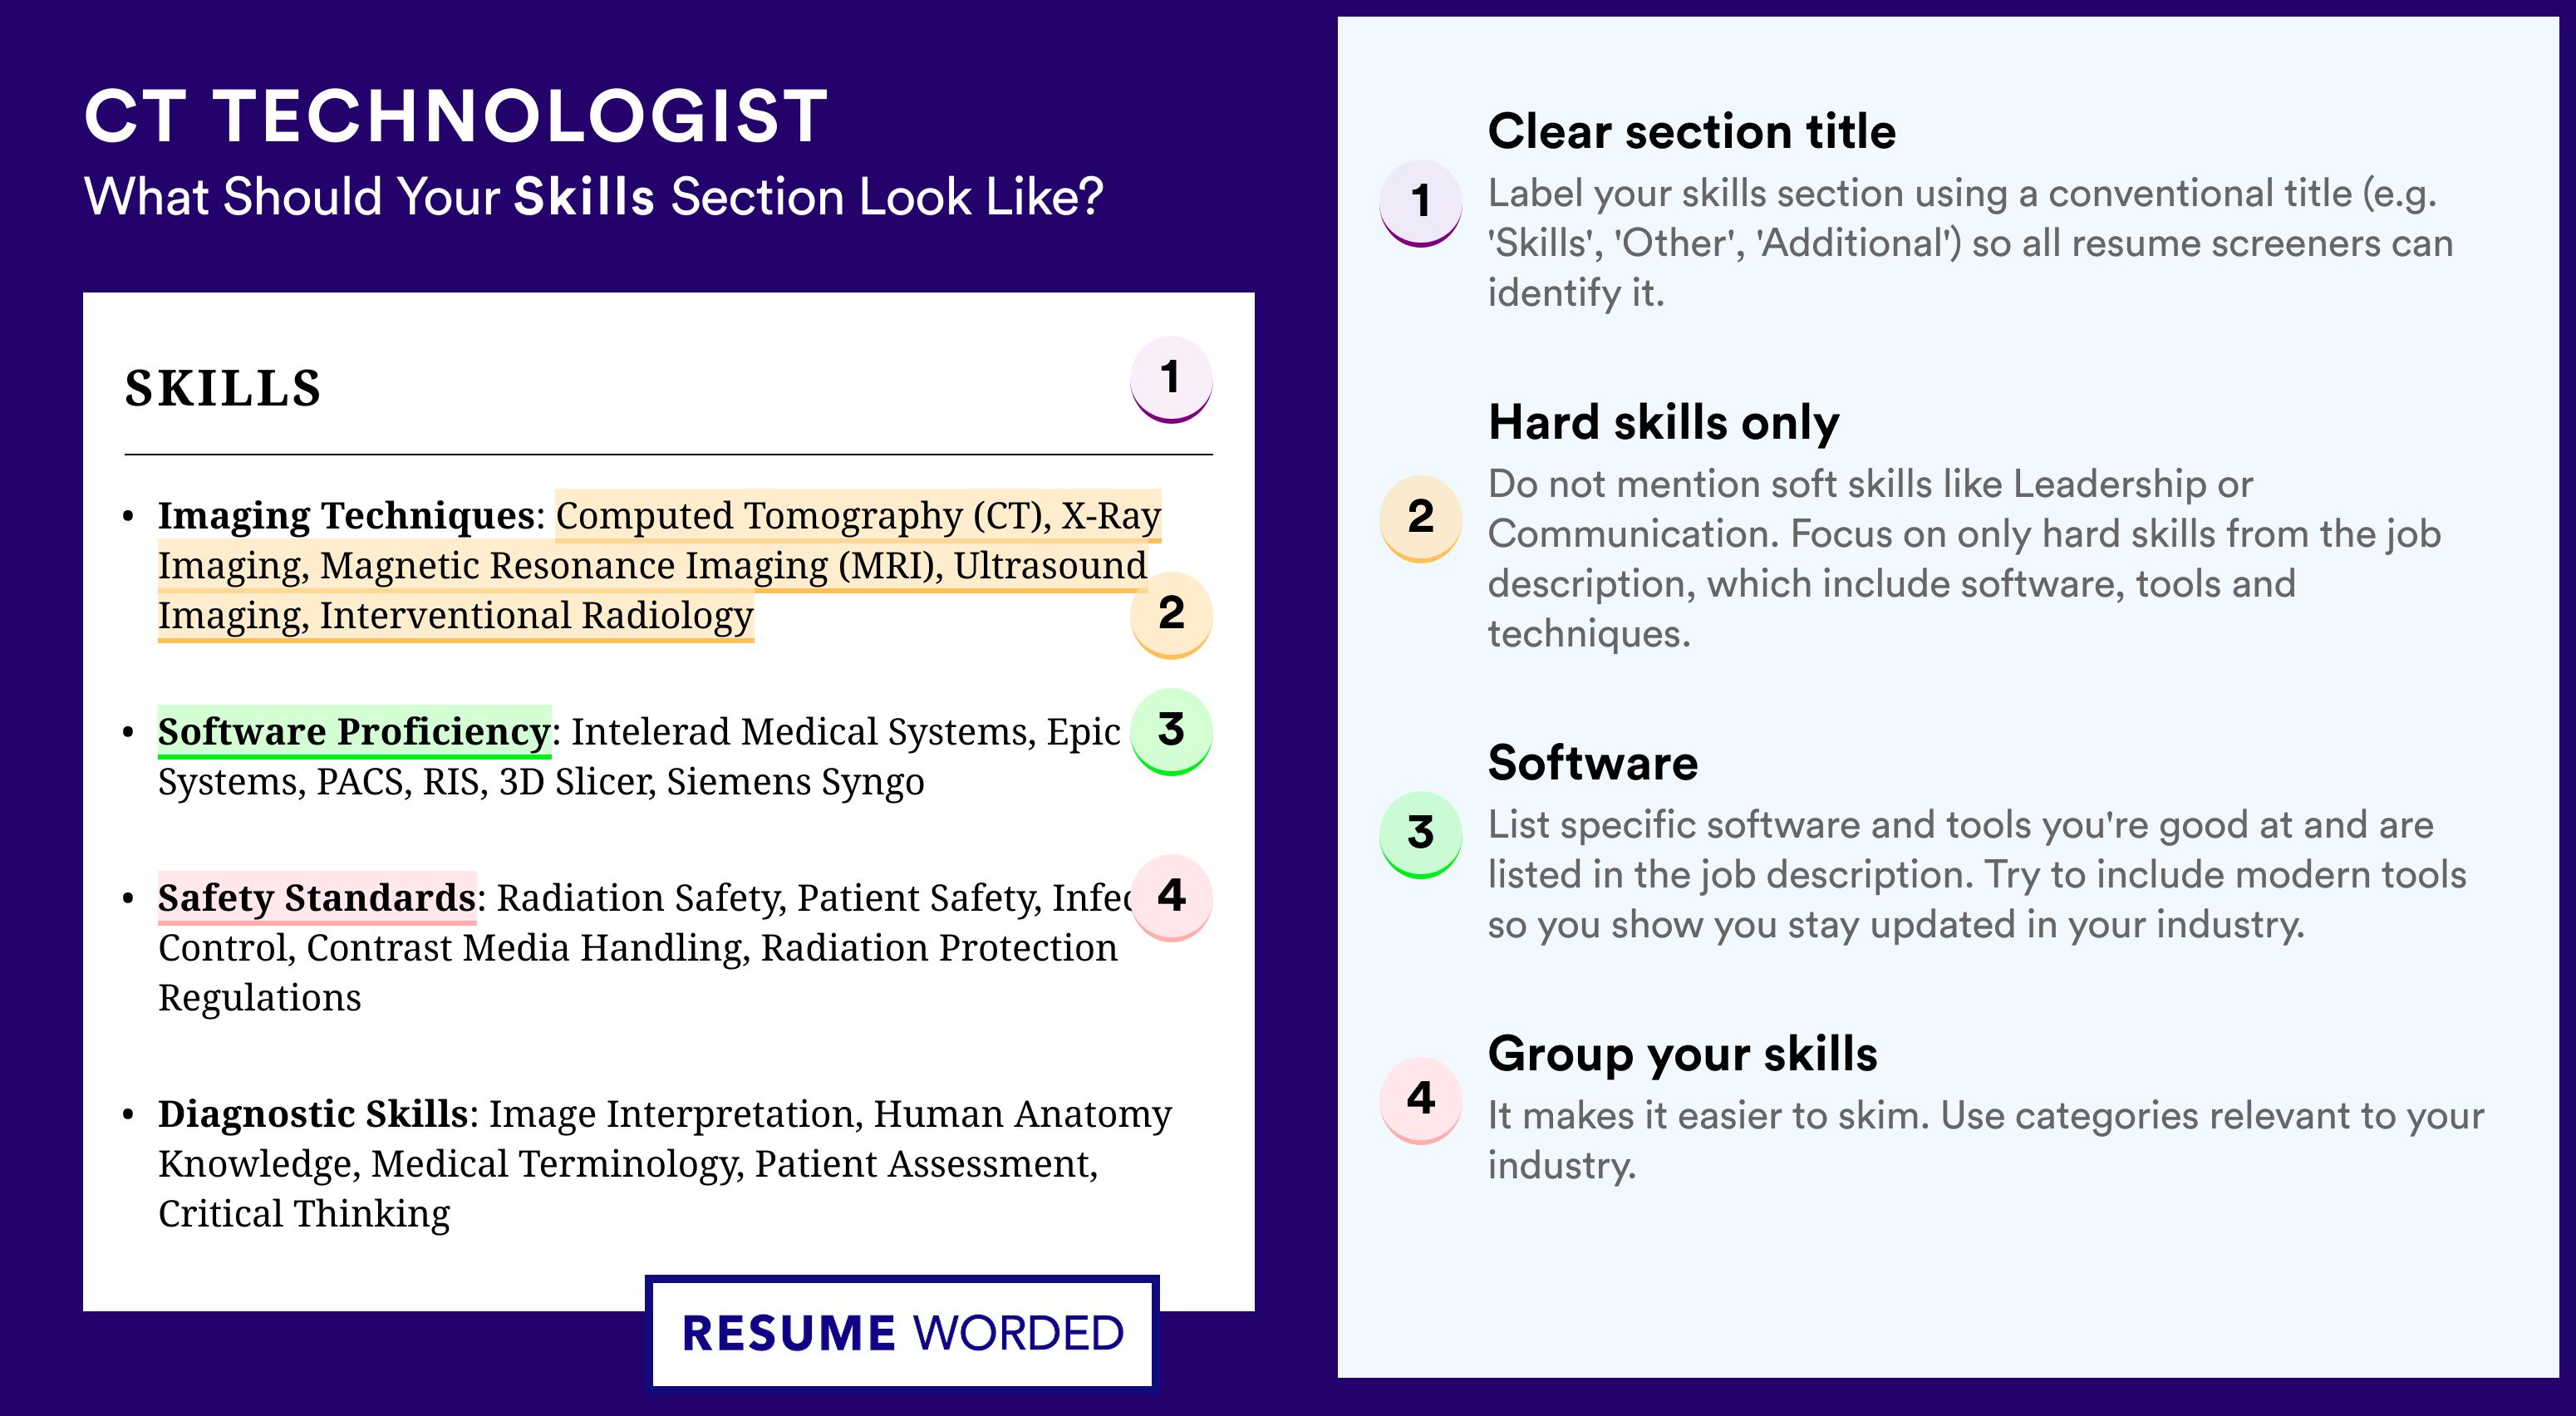 How To Write Your Skills Section - CT Technologist Roles